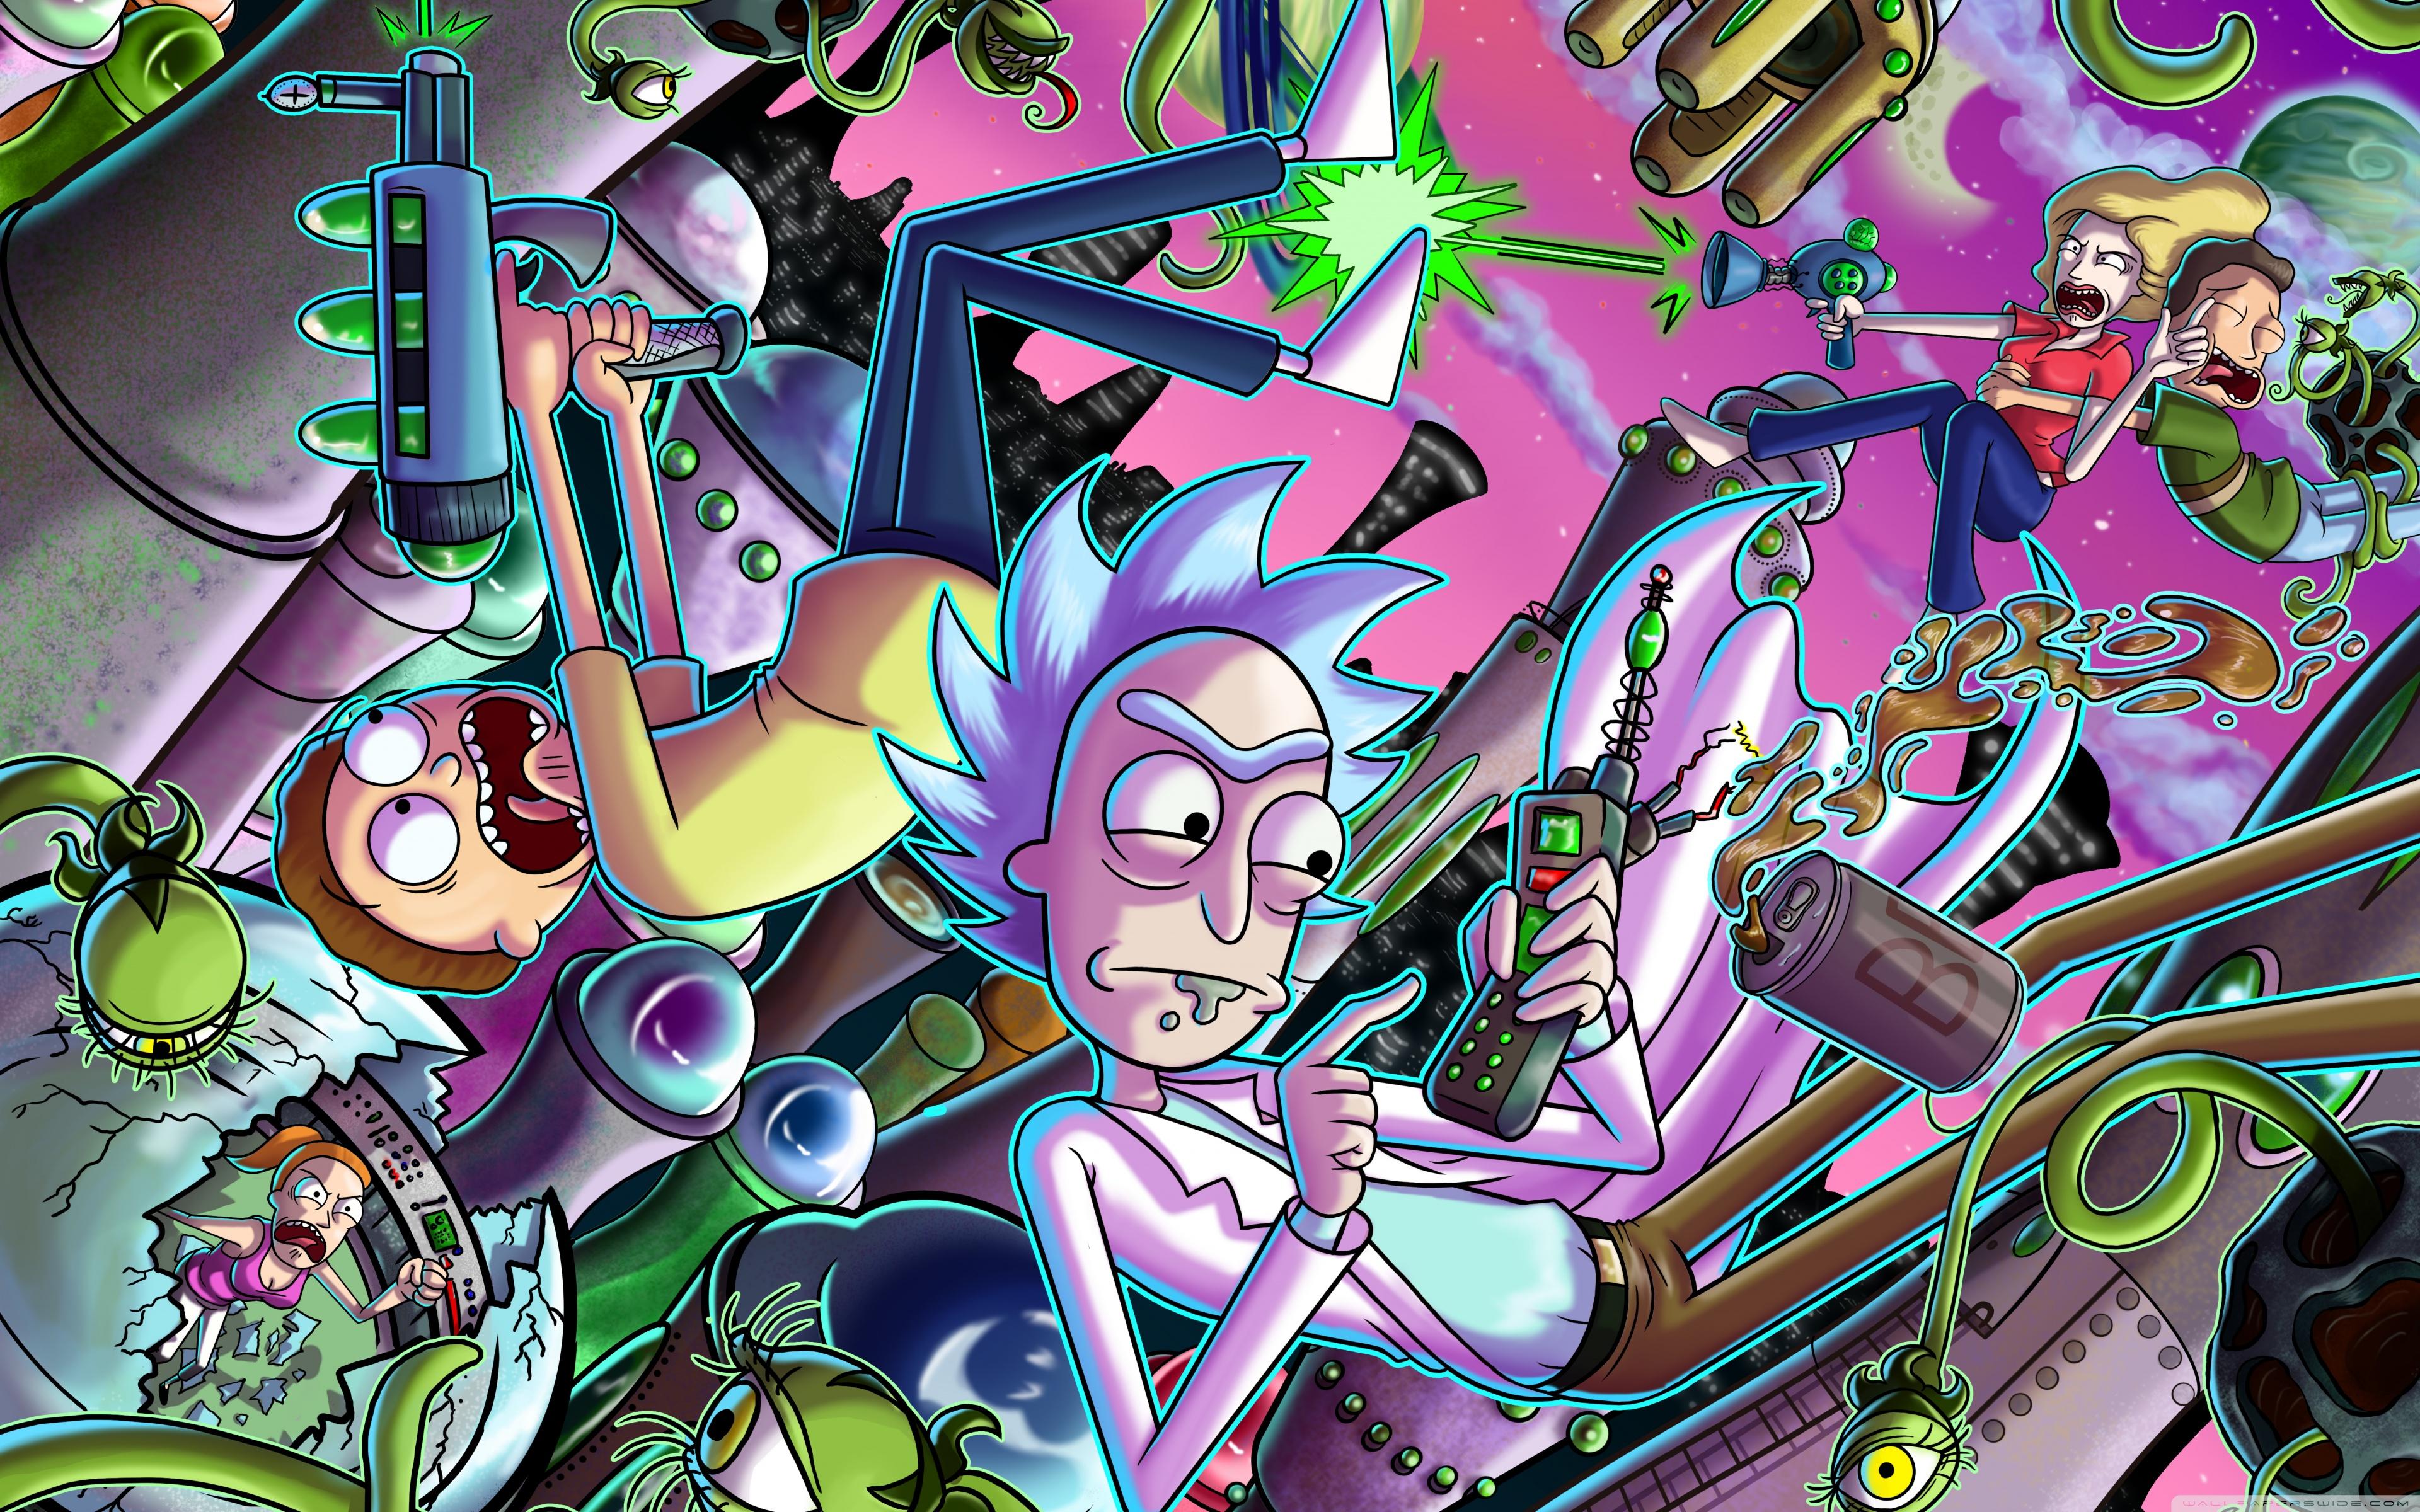 Rick And Morty Wallpaper Hd Hd Desktop Wallpapers K Hd Images And